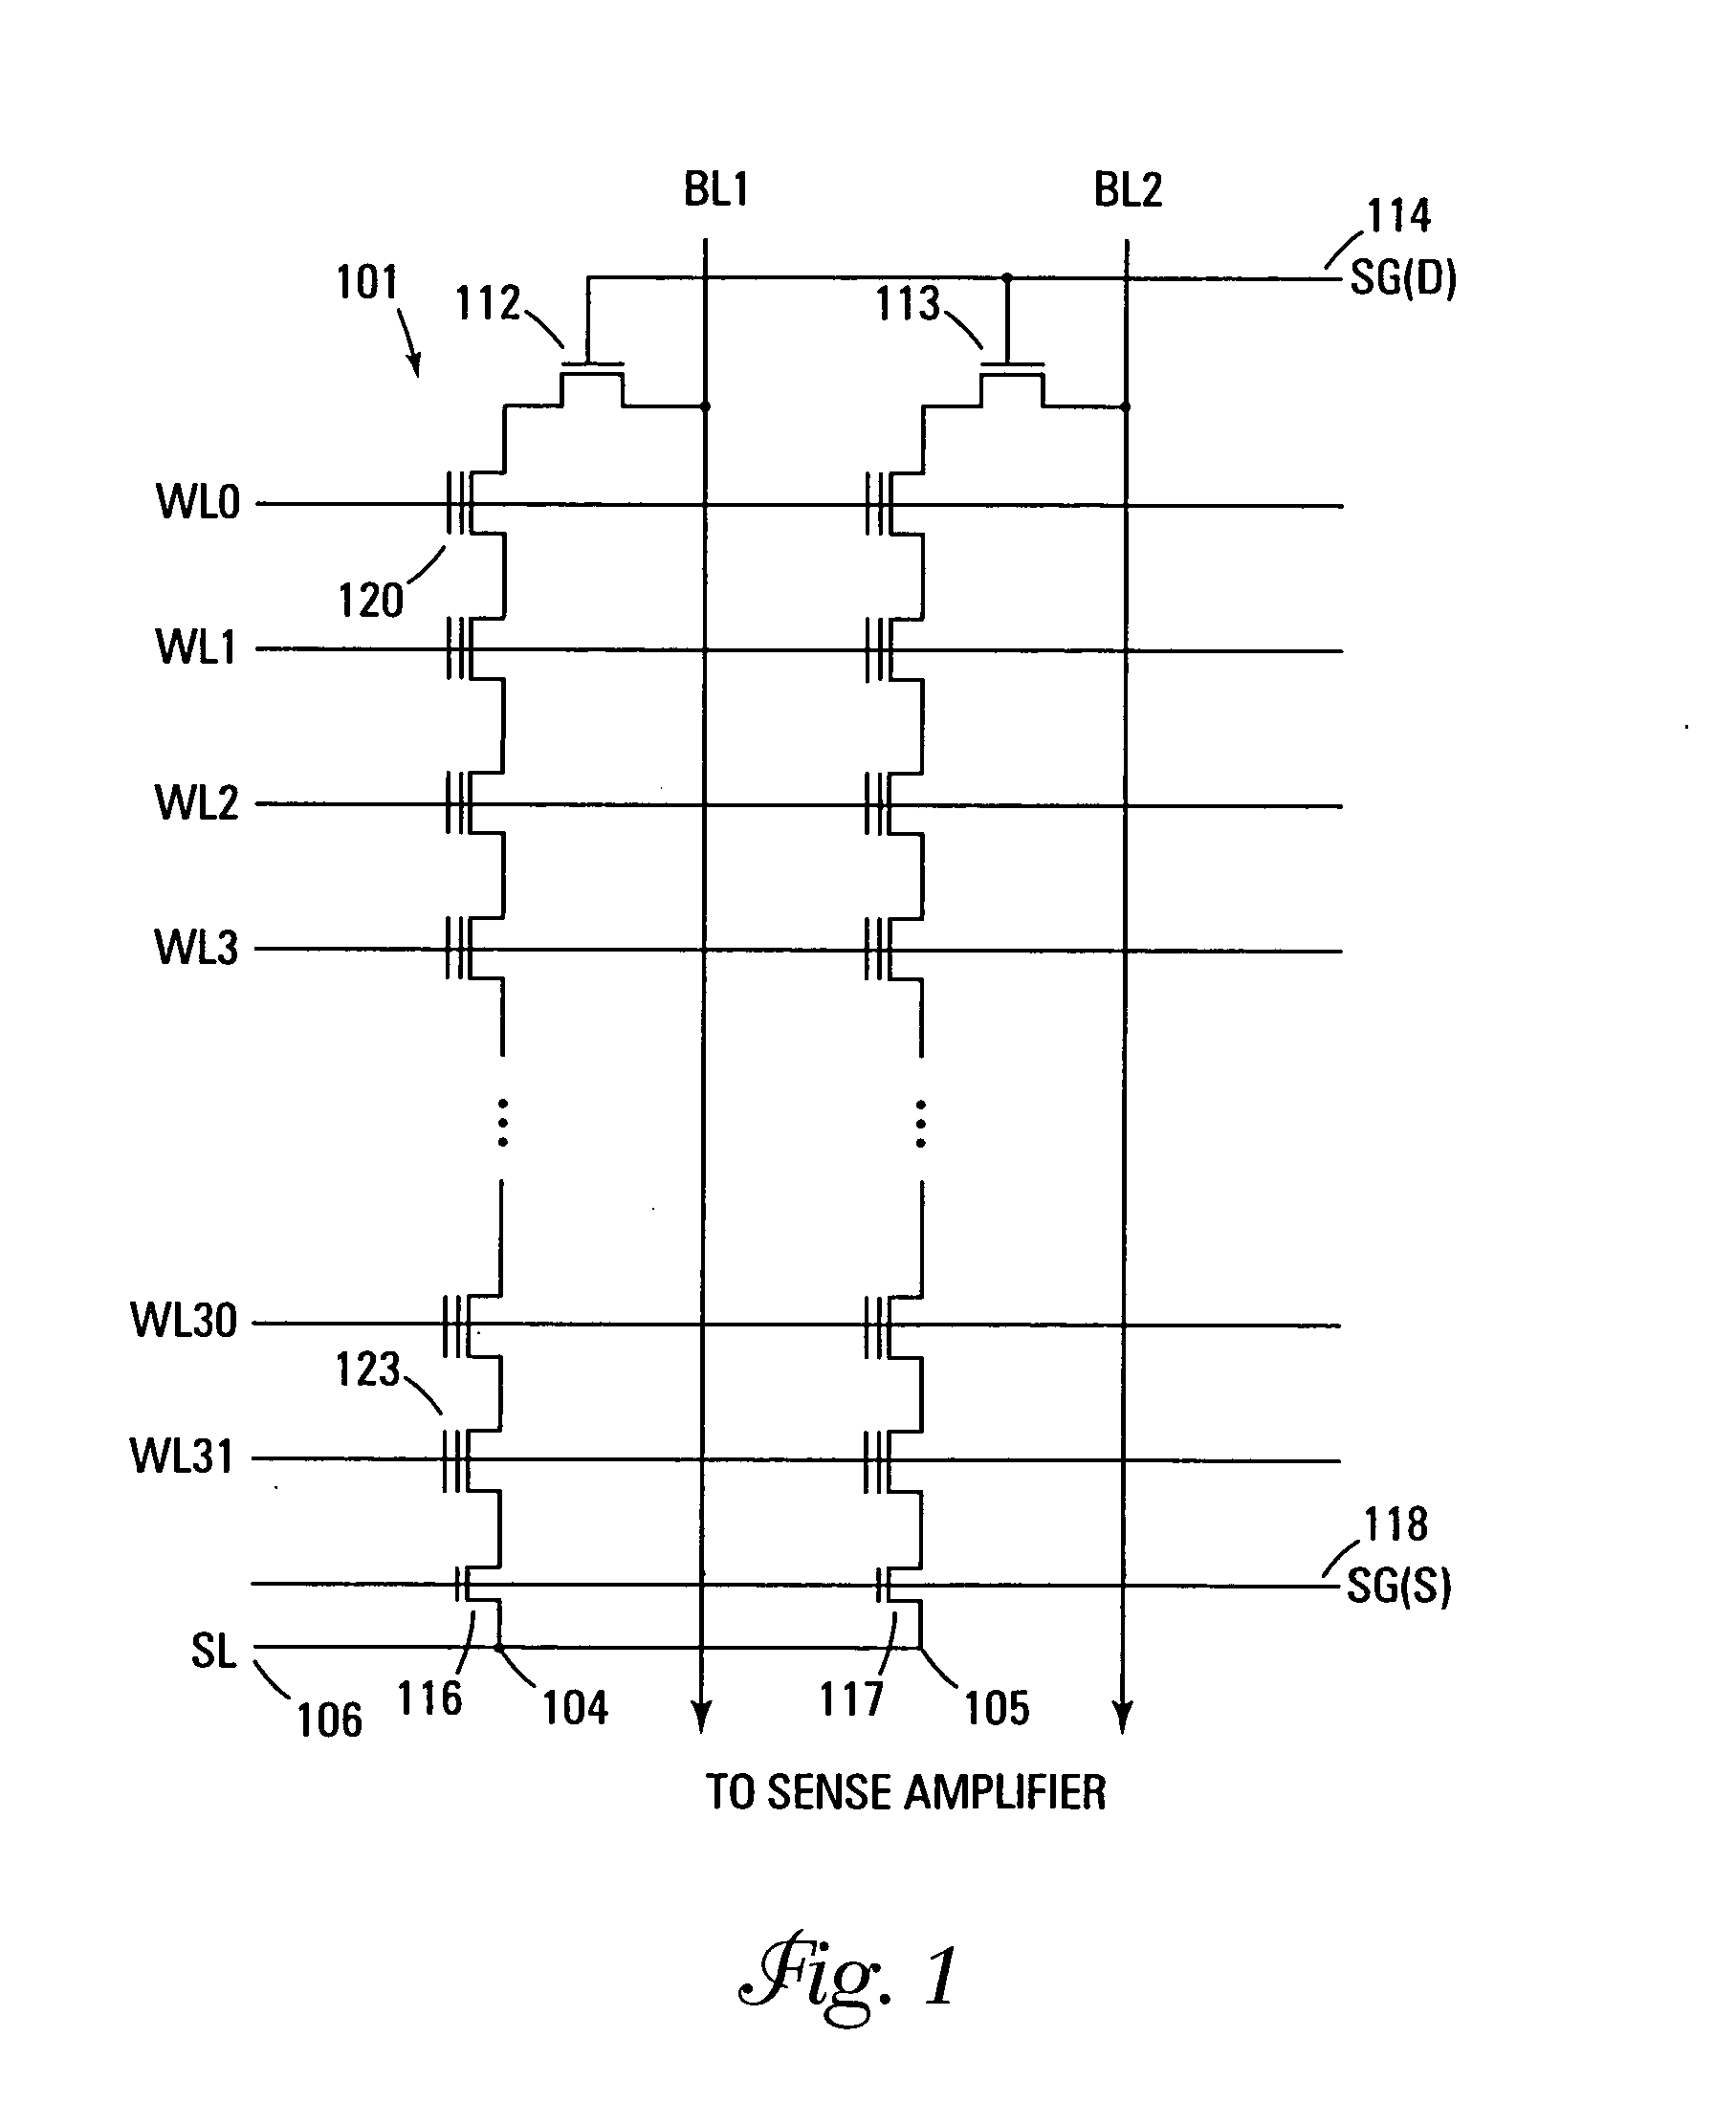 Memory system with user configurable density/performance option